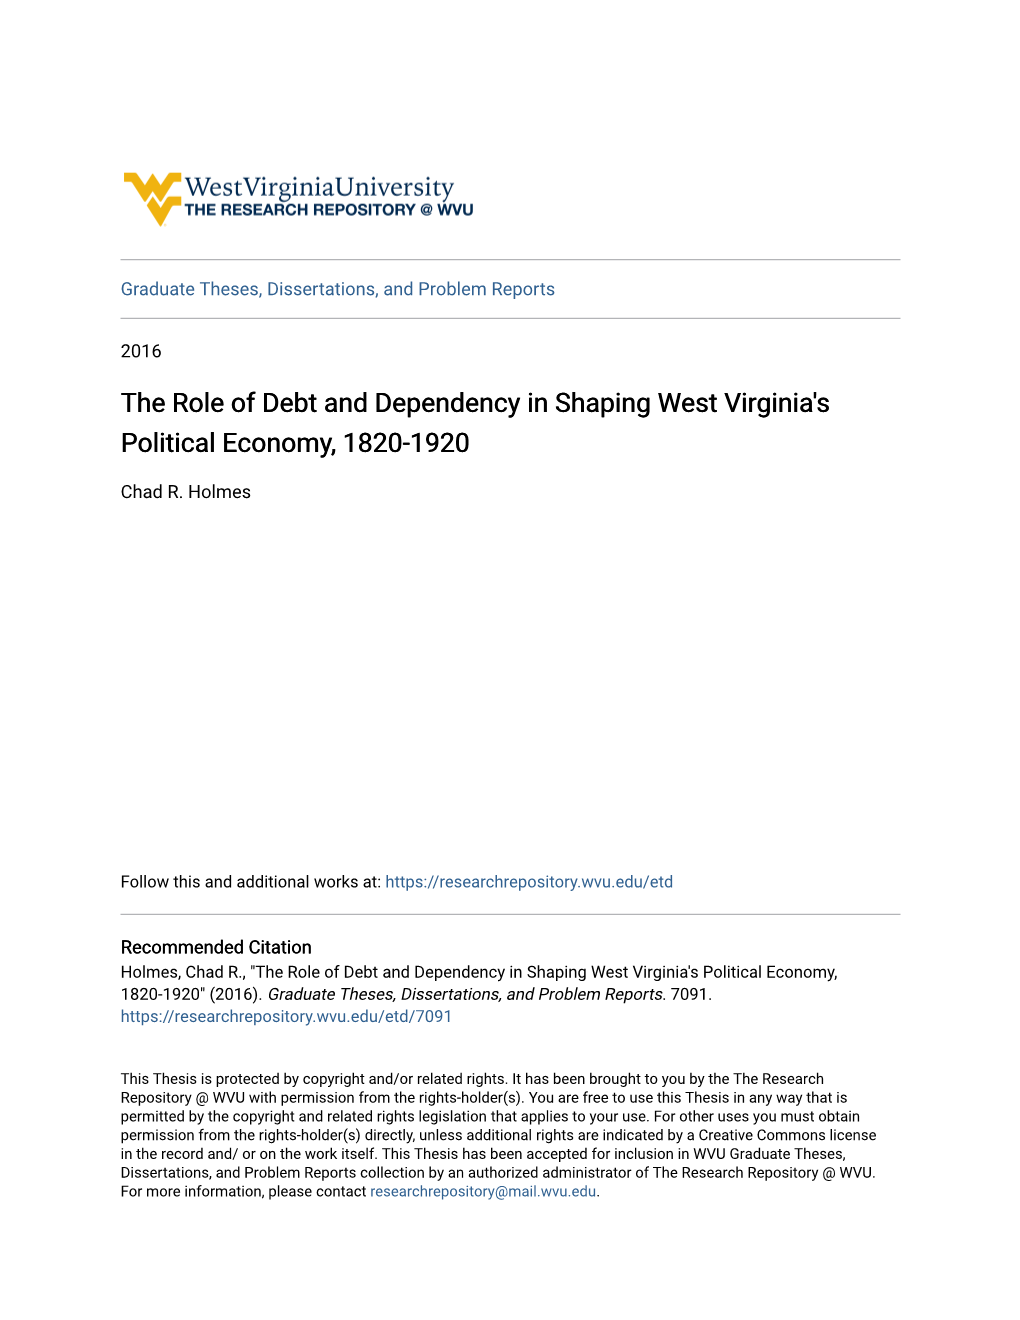 The Role of Debt and Dependency in Shaping West Virginia's Political Economy, 1820-1920